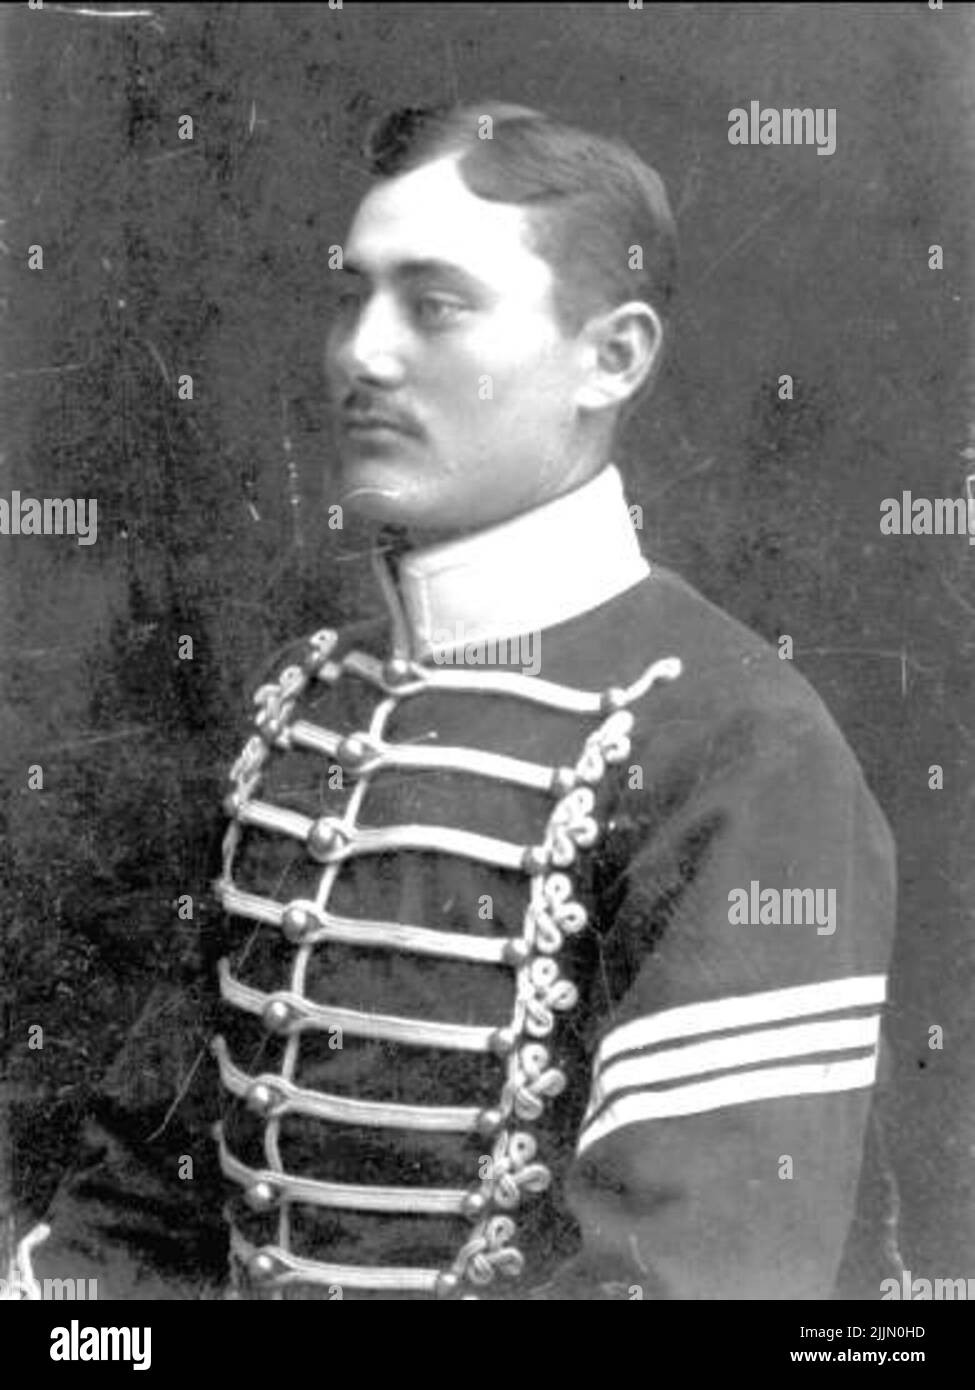 Portrait photo depicting Arvid Kjellander (b 1882 01 25, d 1976 02 19) Half profile. Dressed in house uniform, sub -officer signs on the left sleeve. The photo is probably taken in 1902 when AK went to school in Stockholm. Information according to the daughter Inga Kjellander. The picture taken at Fotographa, Sigge Öijer, Eskilstuna, branches in Malmköping and Sanna Hed. Stock Photo